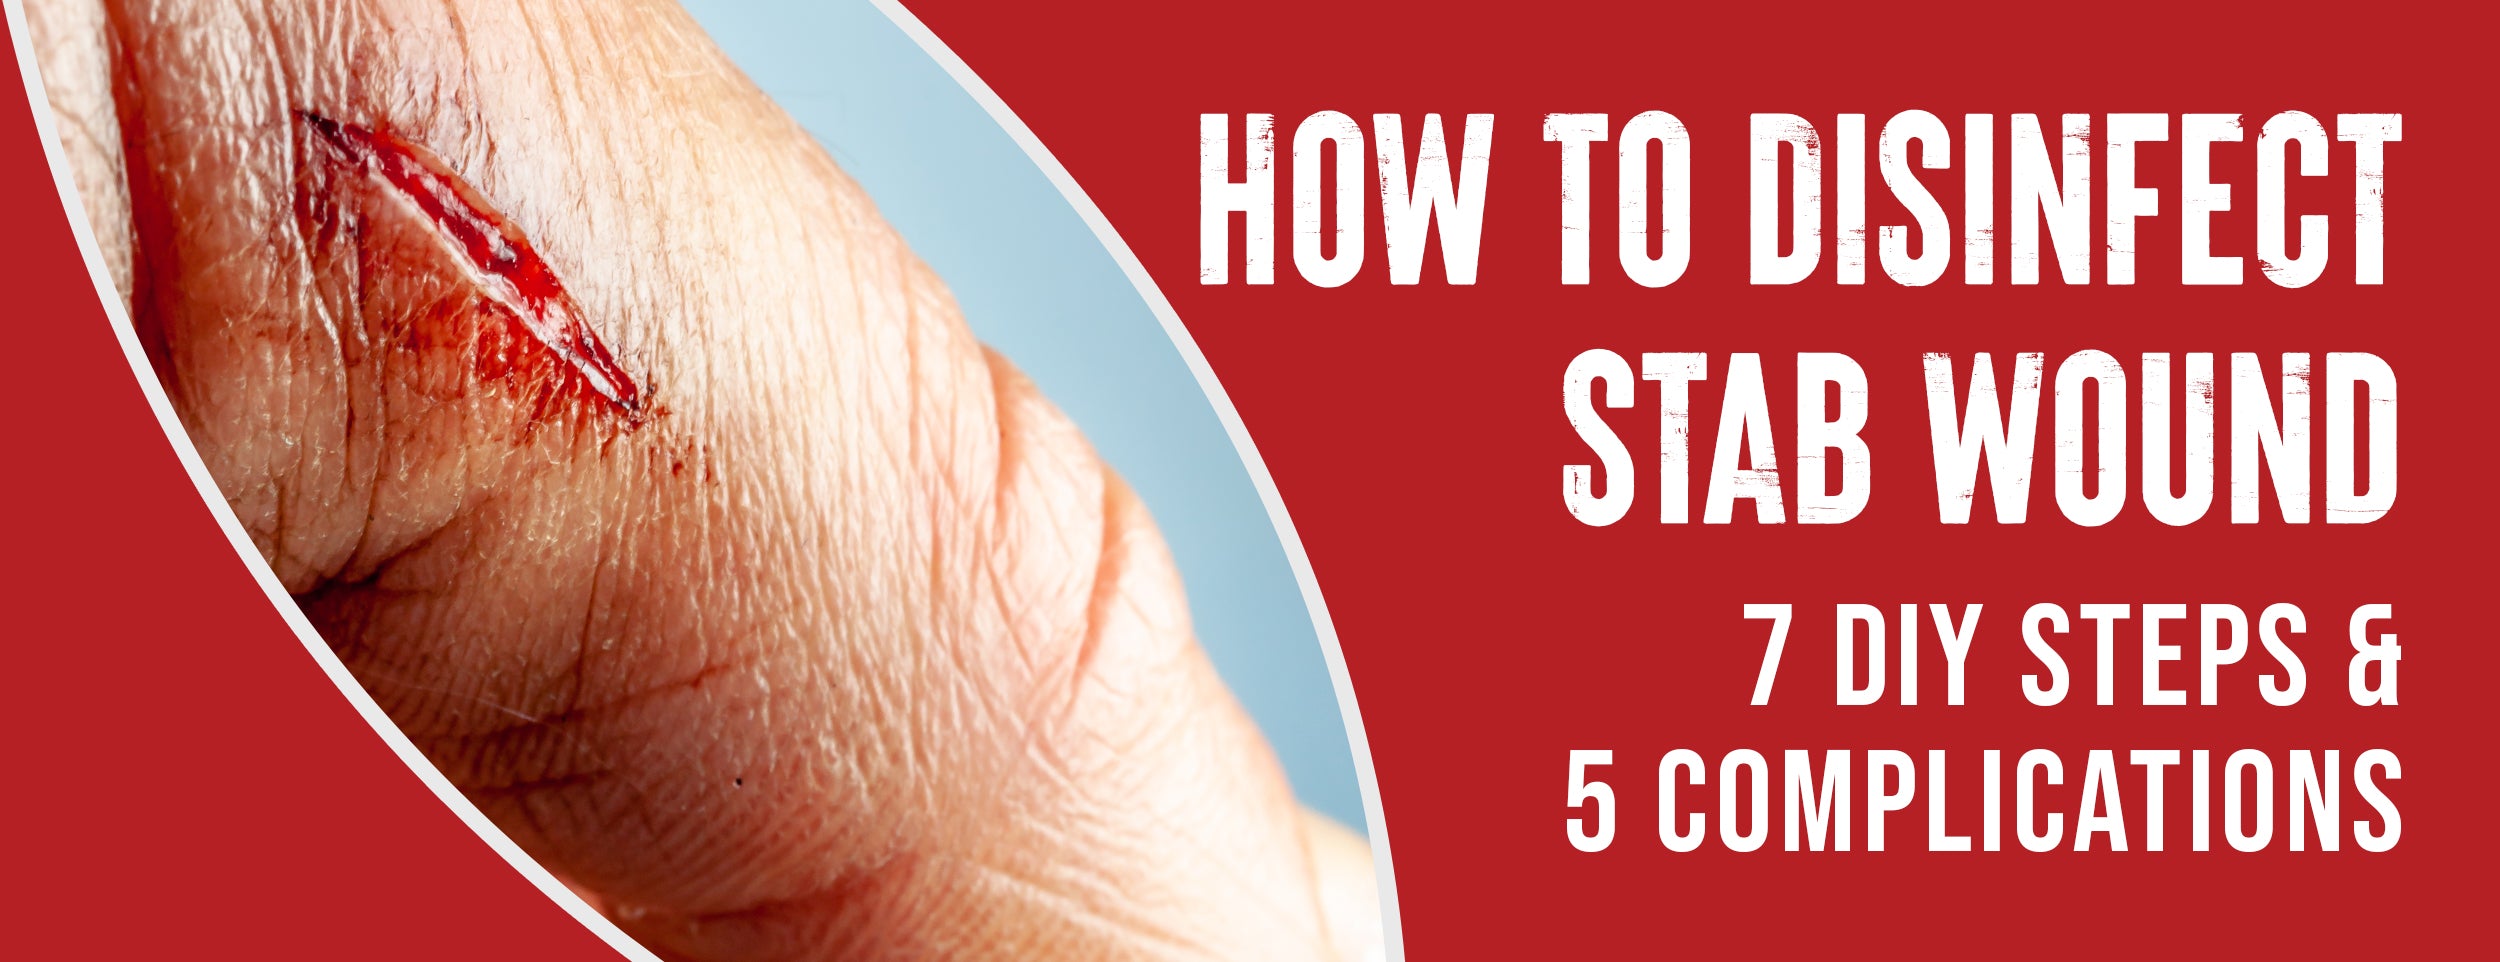 7 Tips To Disinfect Stab Wounds [5 Complications]